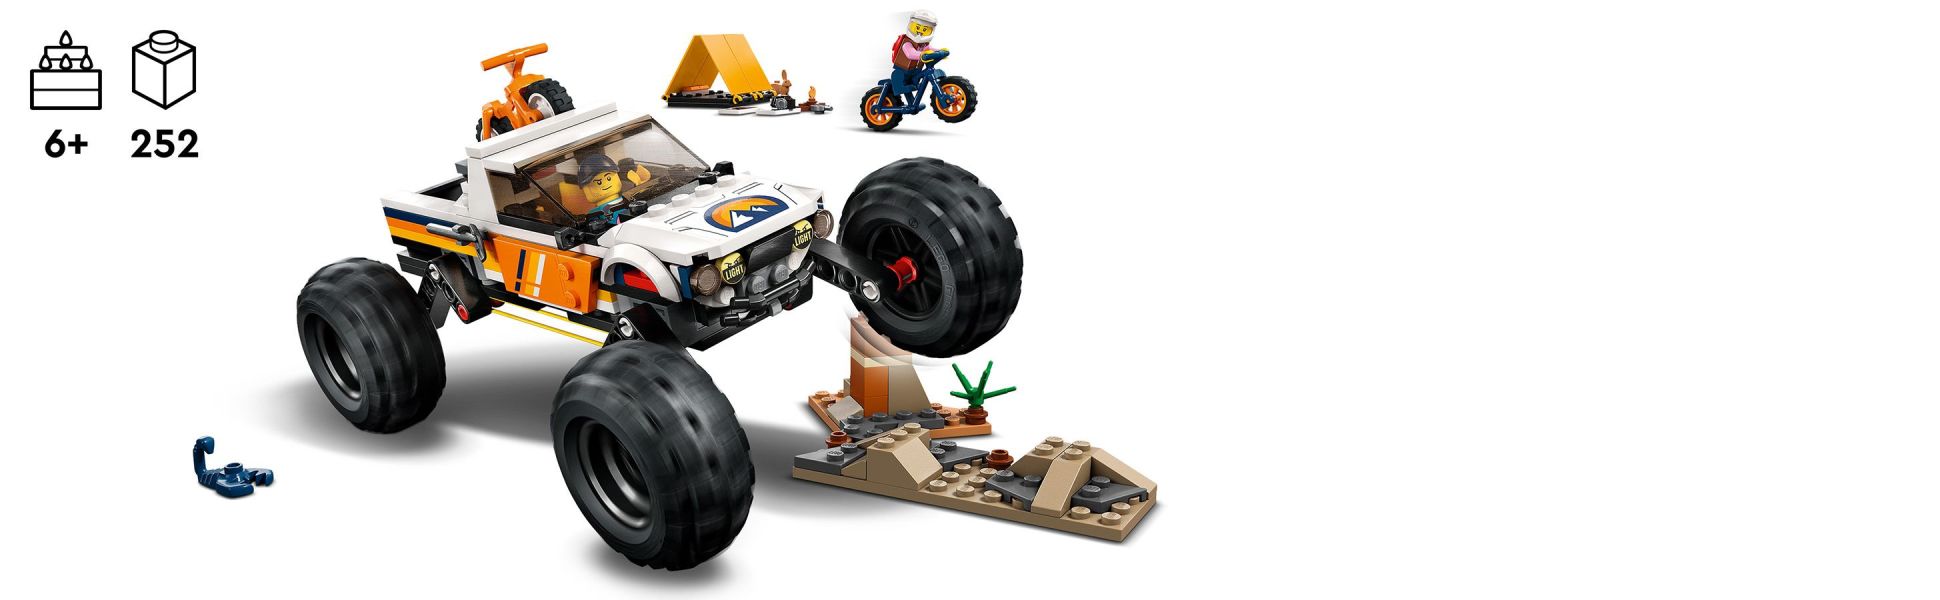 Style LEGO City 4x4 Car Minifigures, Bikes, - for Vehicle 60387 Toy 2 Ages Including Off-Roader Working Mountain Toy 6+ with Kids Camping Adventures Monster Truck Building and Set Suspension